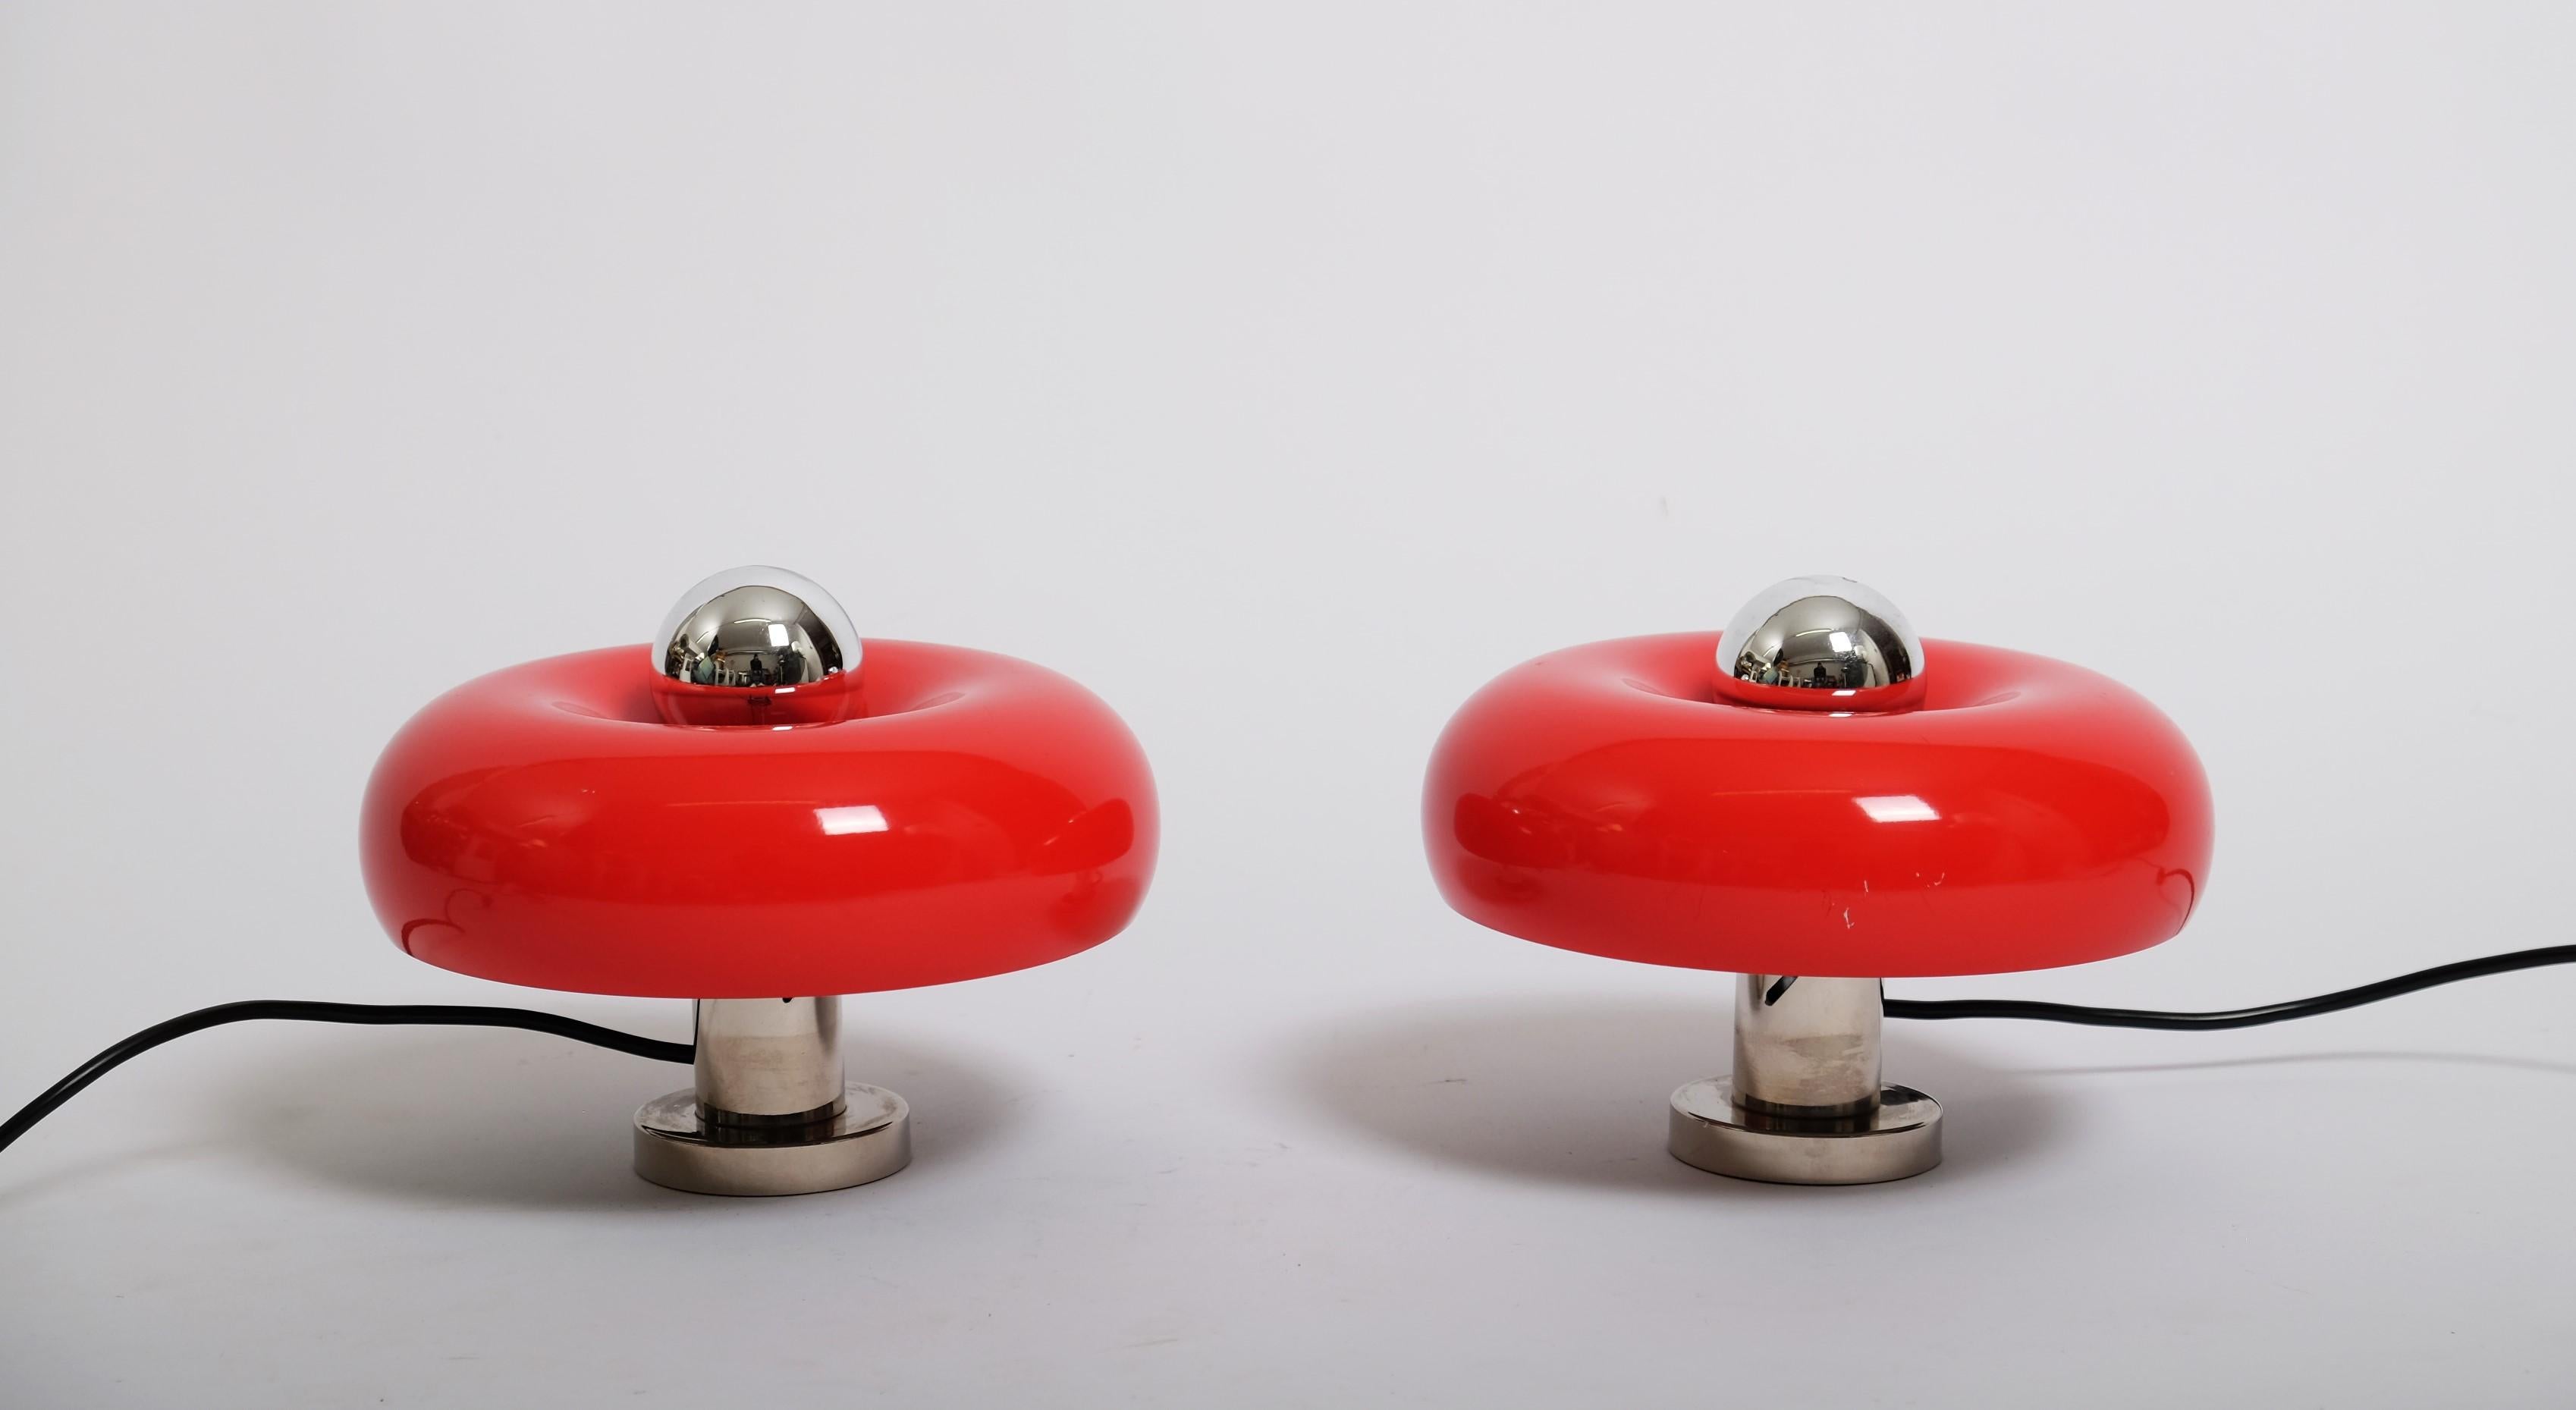 Very nice pair of sconces or table lamps designed by Ingo Maurer, Germany 1960s. These lamps have a bit of a donut shape and the red lacquered shade can be adjusted in height. The lamps are easy to wall hang but can also be used as a table lamp.